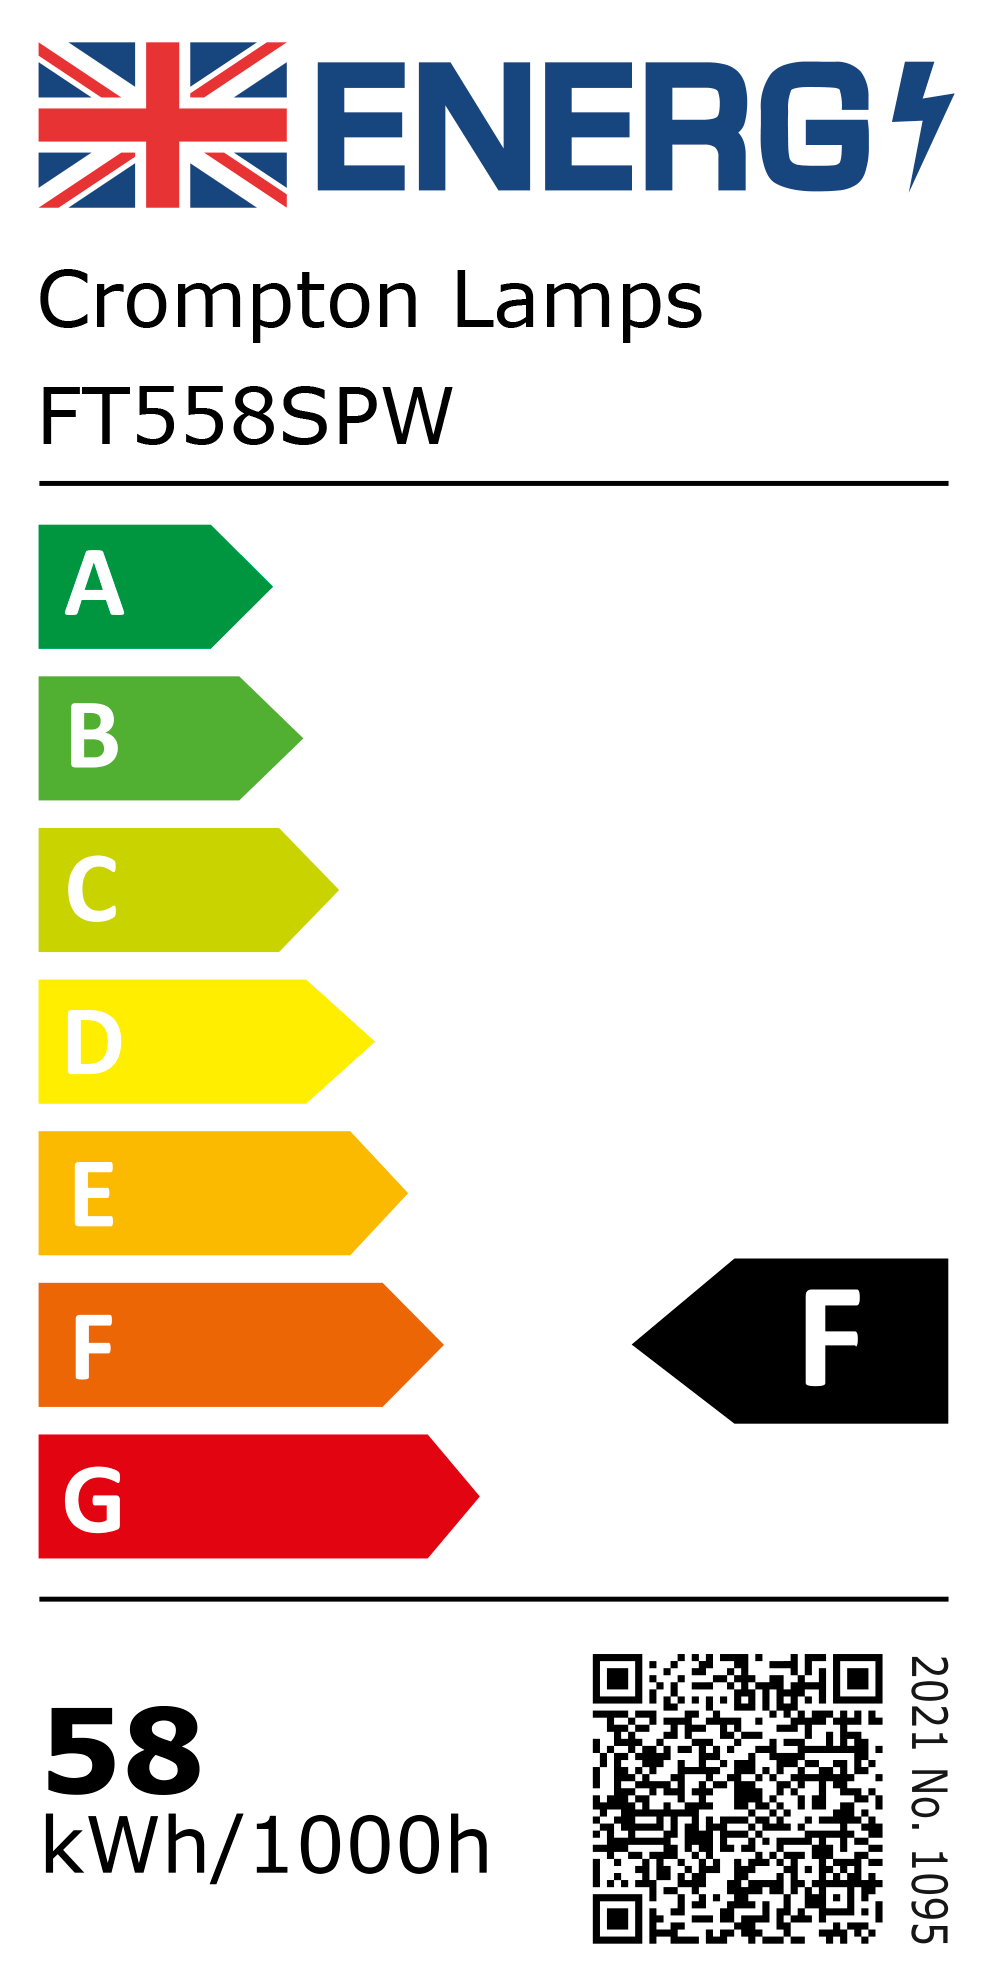 New 2021 Energy Rating Label: Stock Code FT558SPW